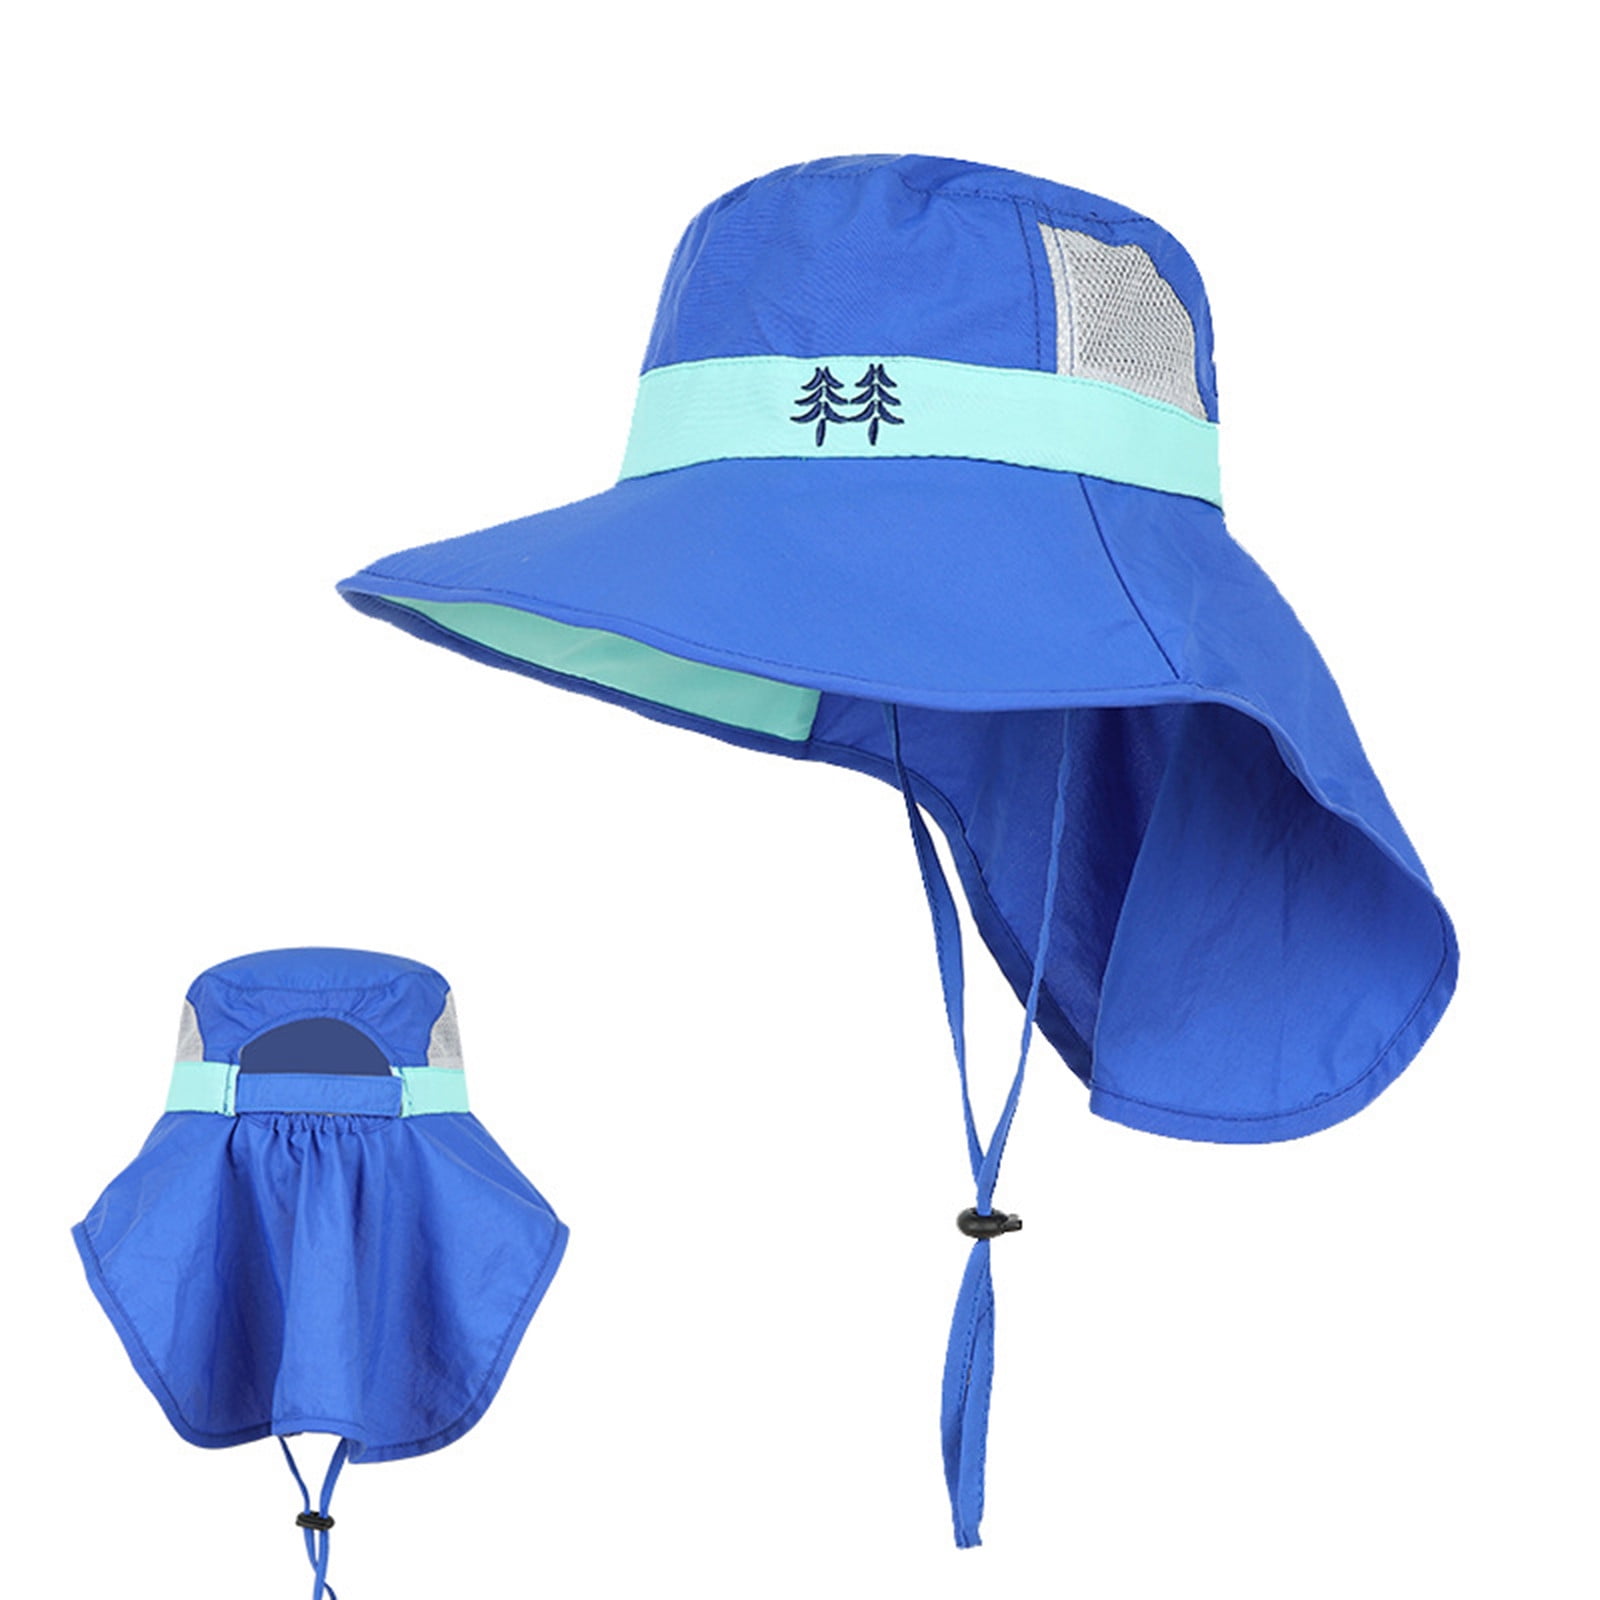 Jeff & Aimy 100% Cotton Foldable Toddler Kids Baby Boys Sun Hat Animals Bucket Hats with Adjustable Chin Strap 